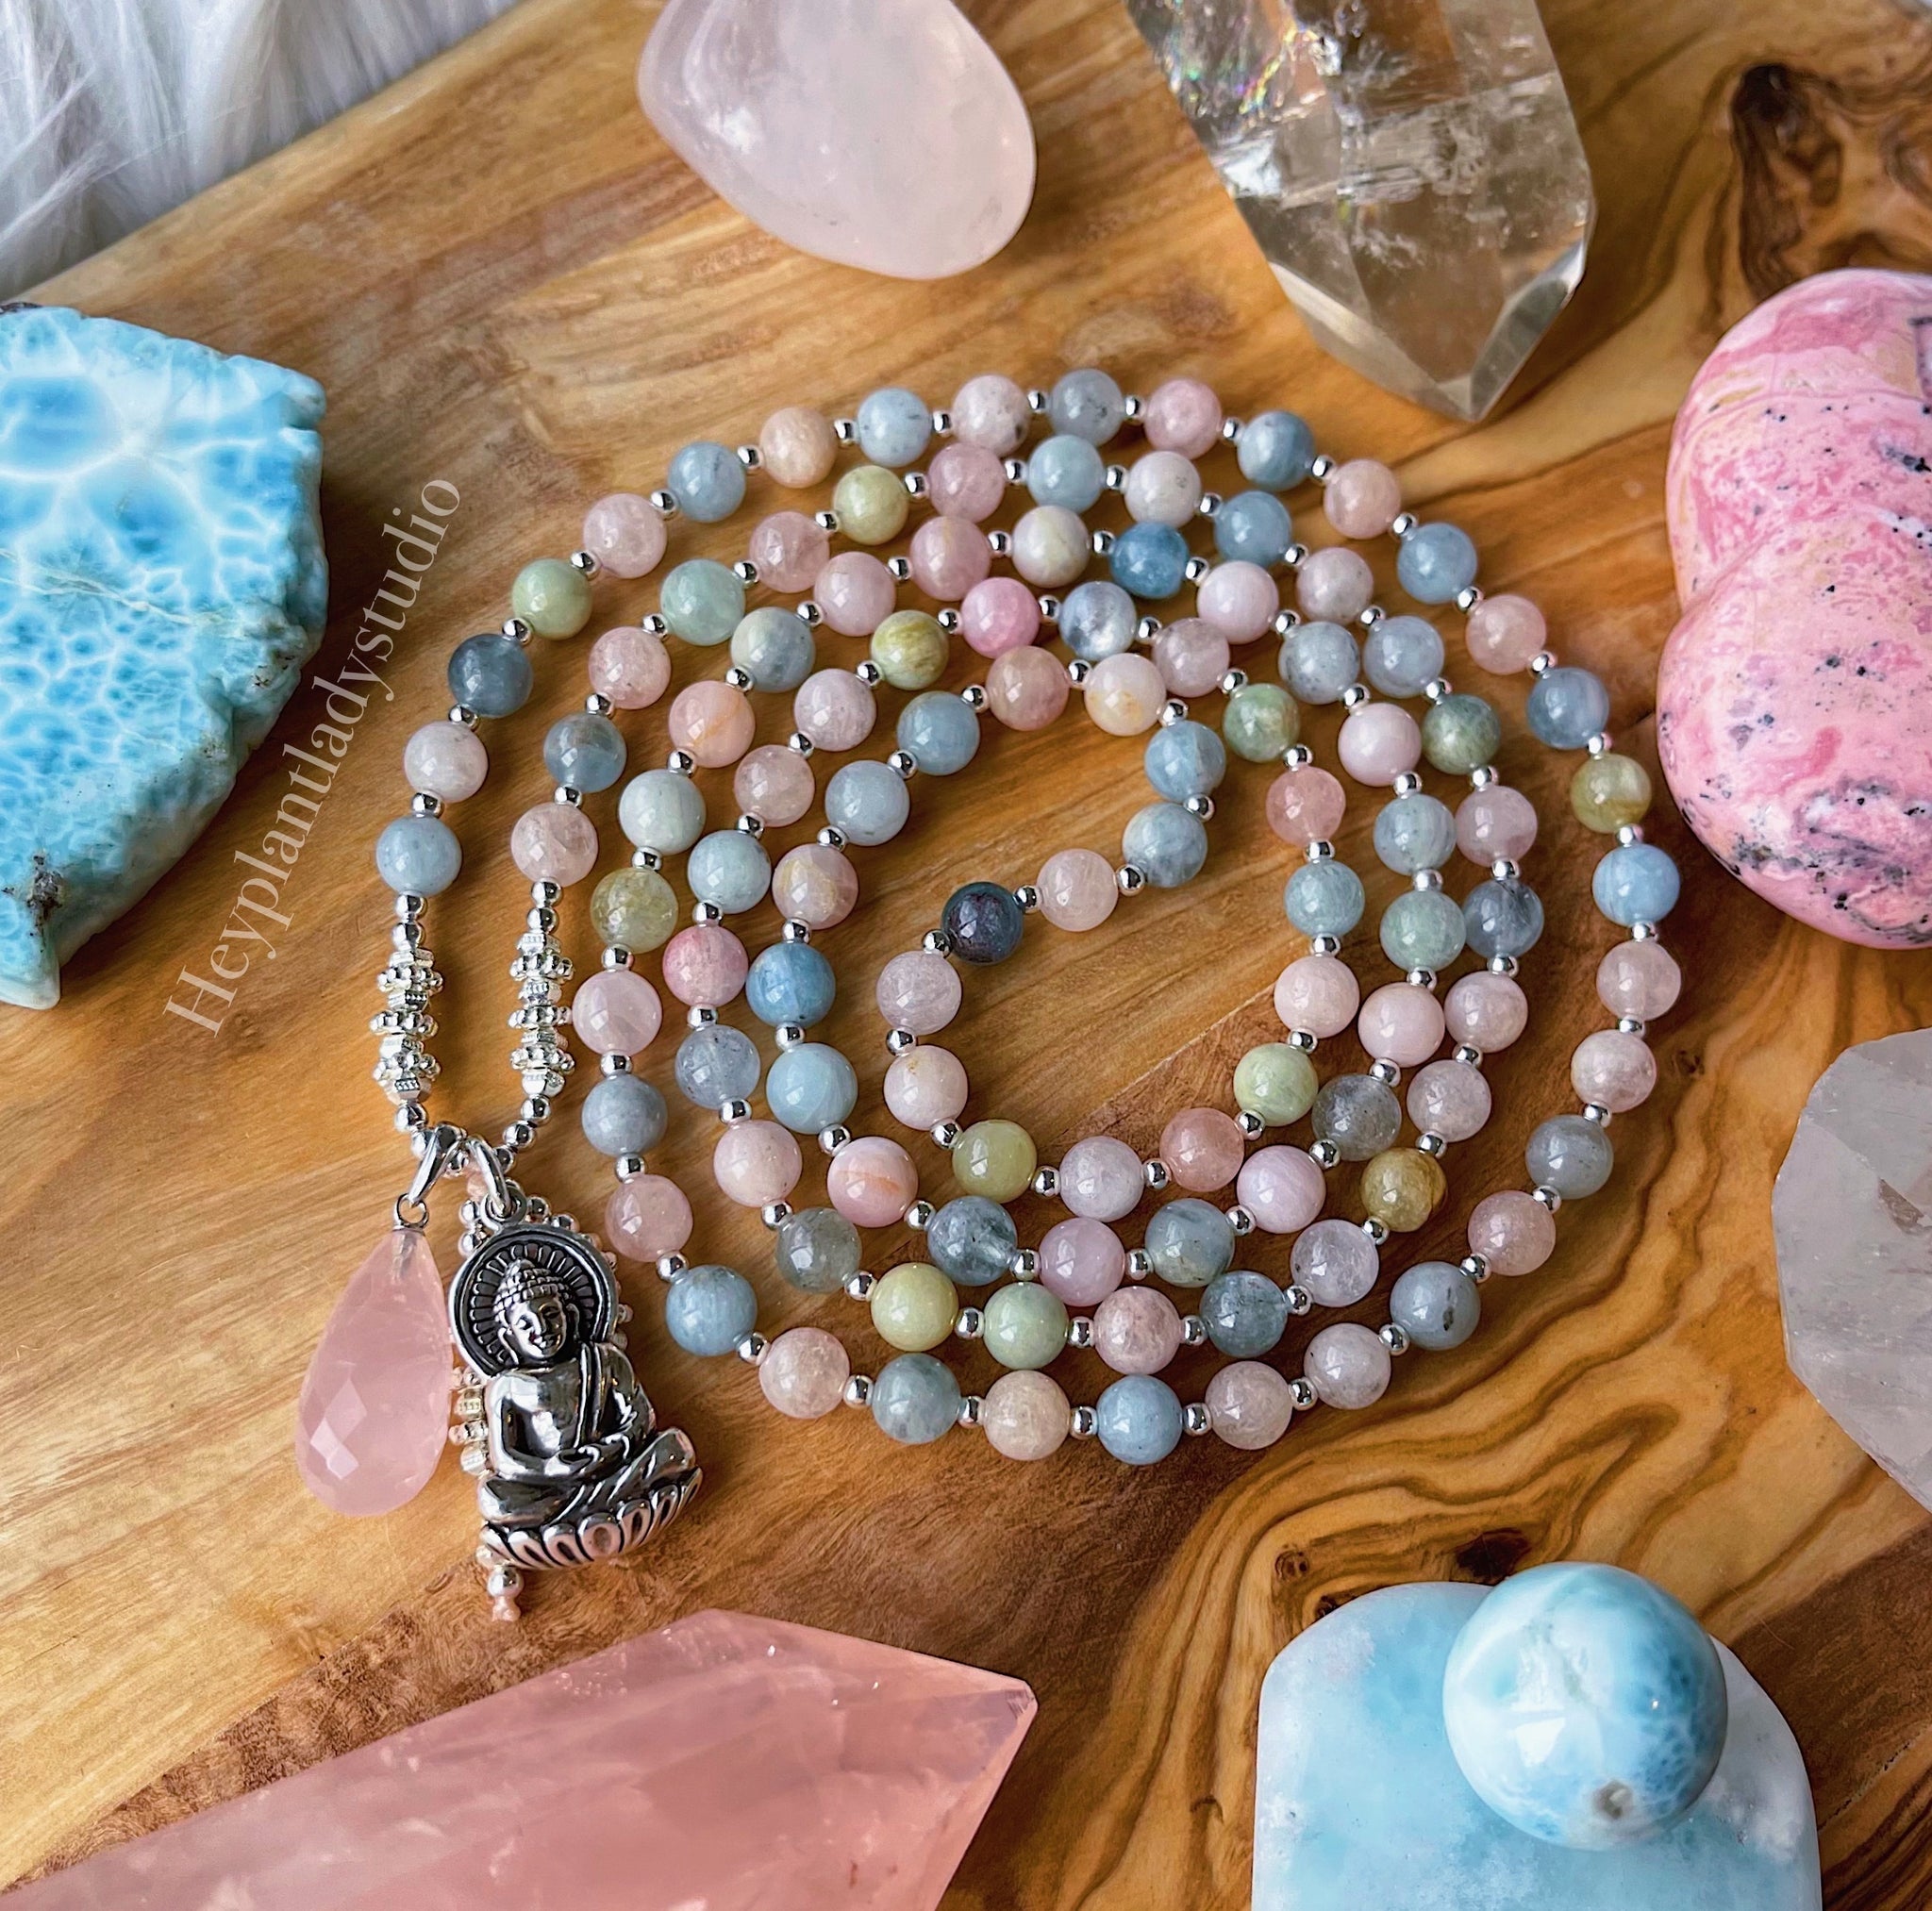 Pink Semi-precious Gemstone Necklace, Agate, Rose Quartz, Boho Luxe  Statement Jewelry, MISTY Necklace, Great Gift Idea, Daily Wear - Etsy